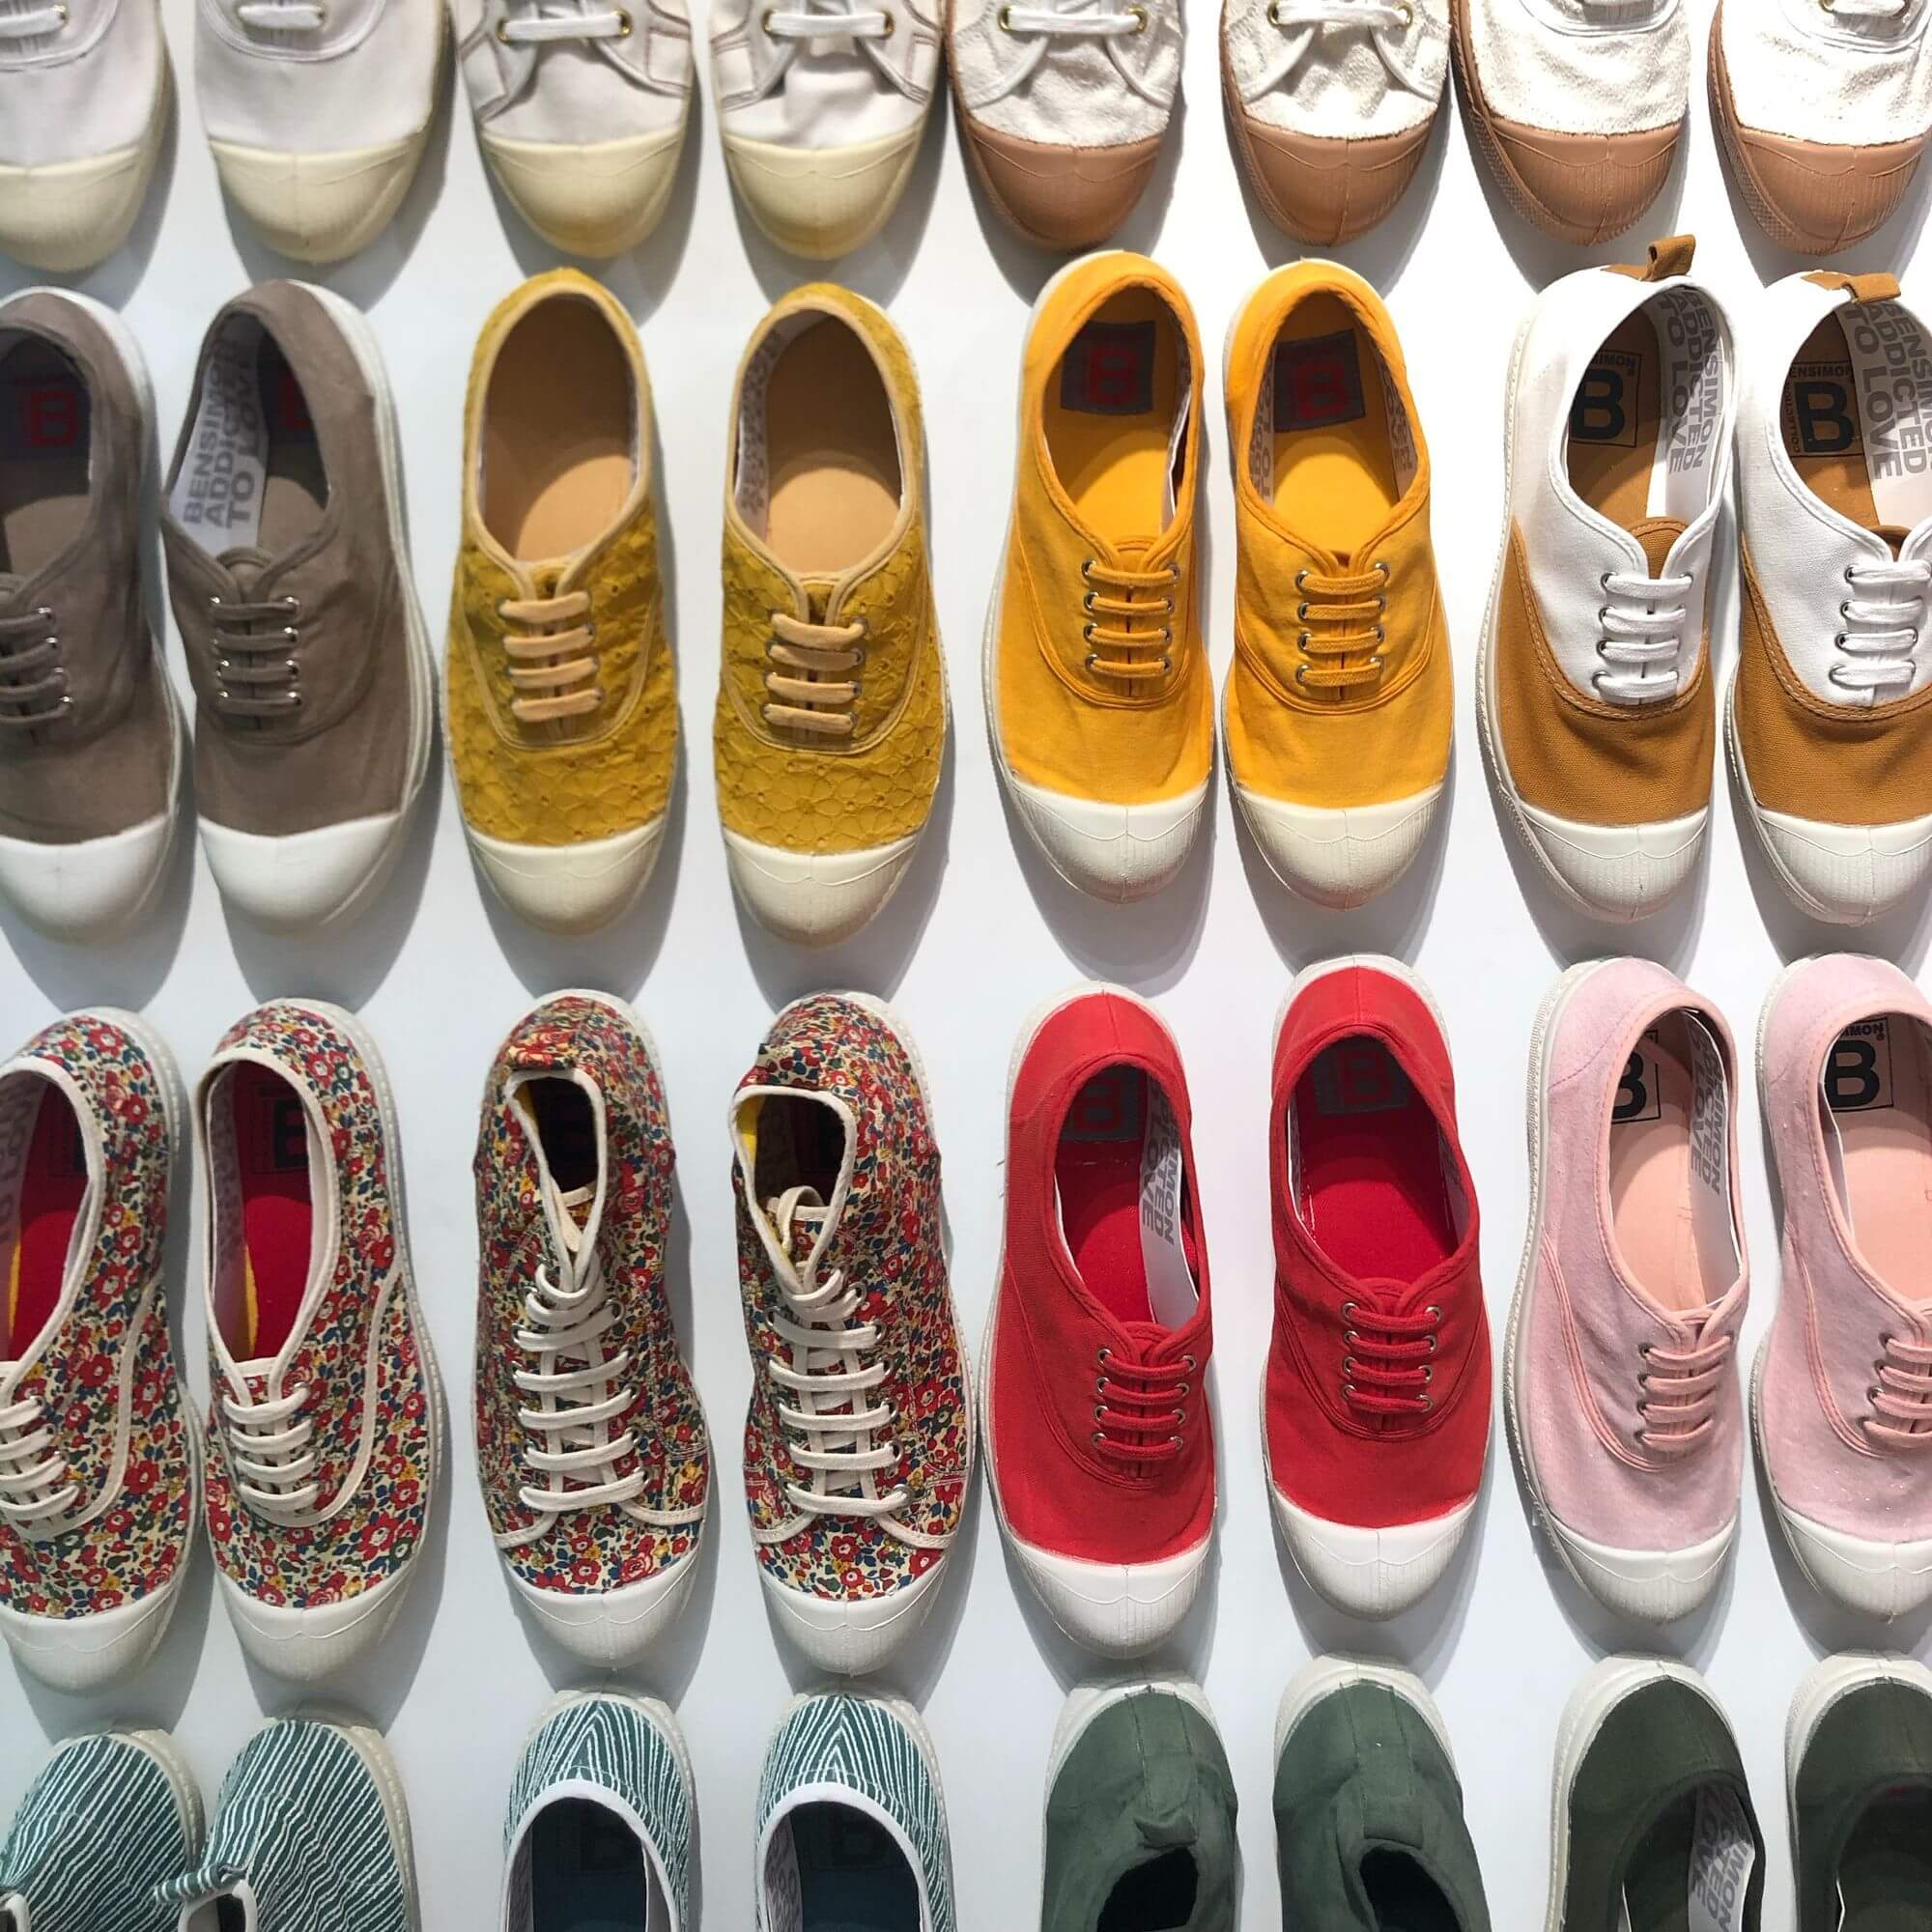 Colourful shoes lined up in four rows on a white background